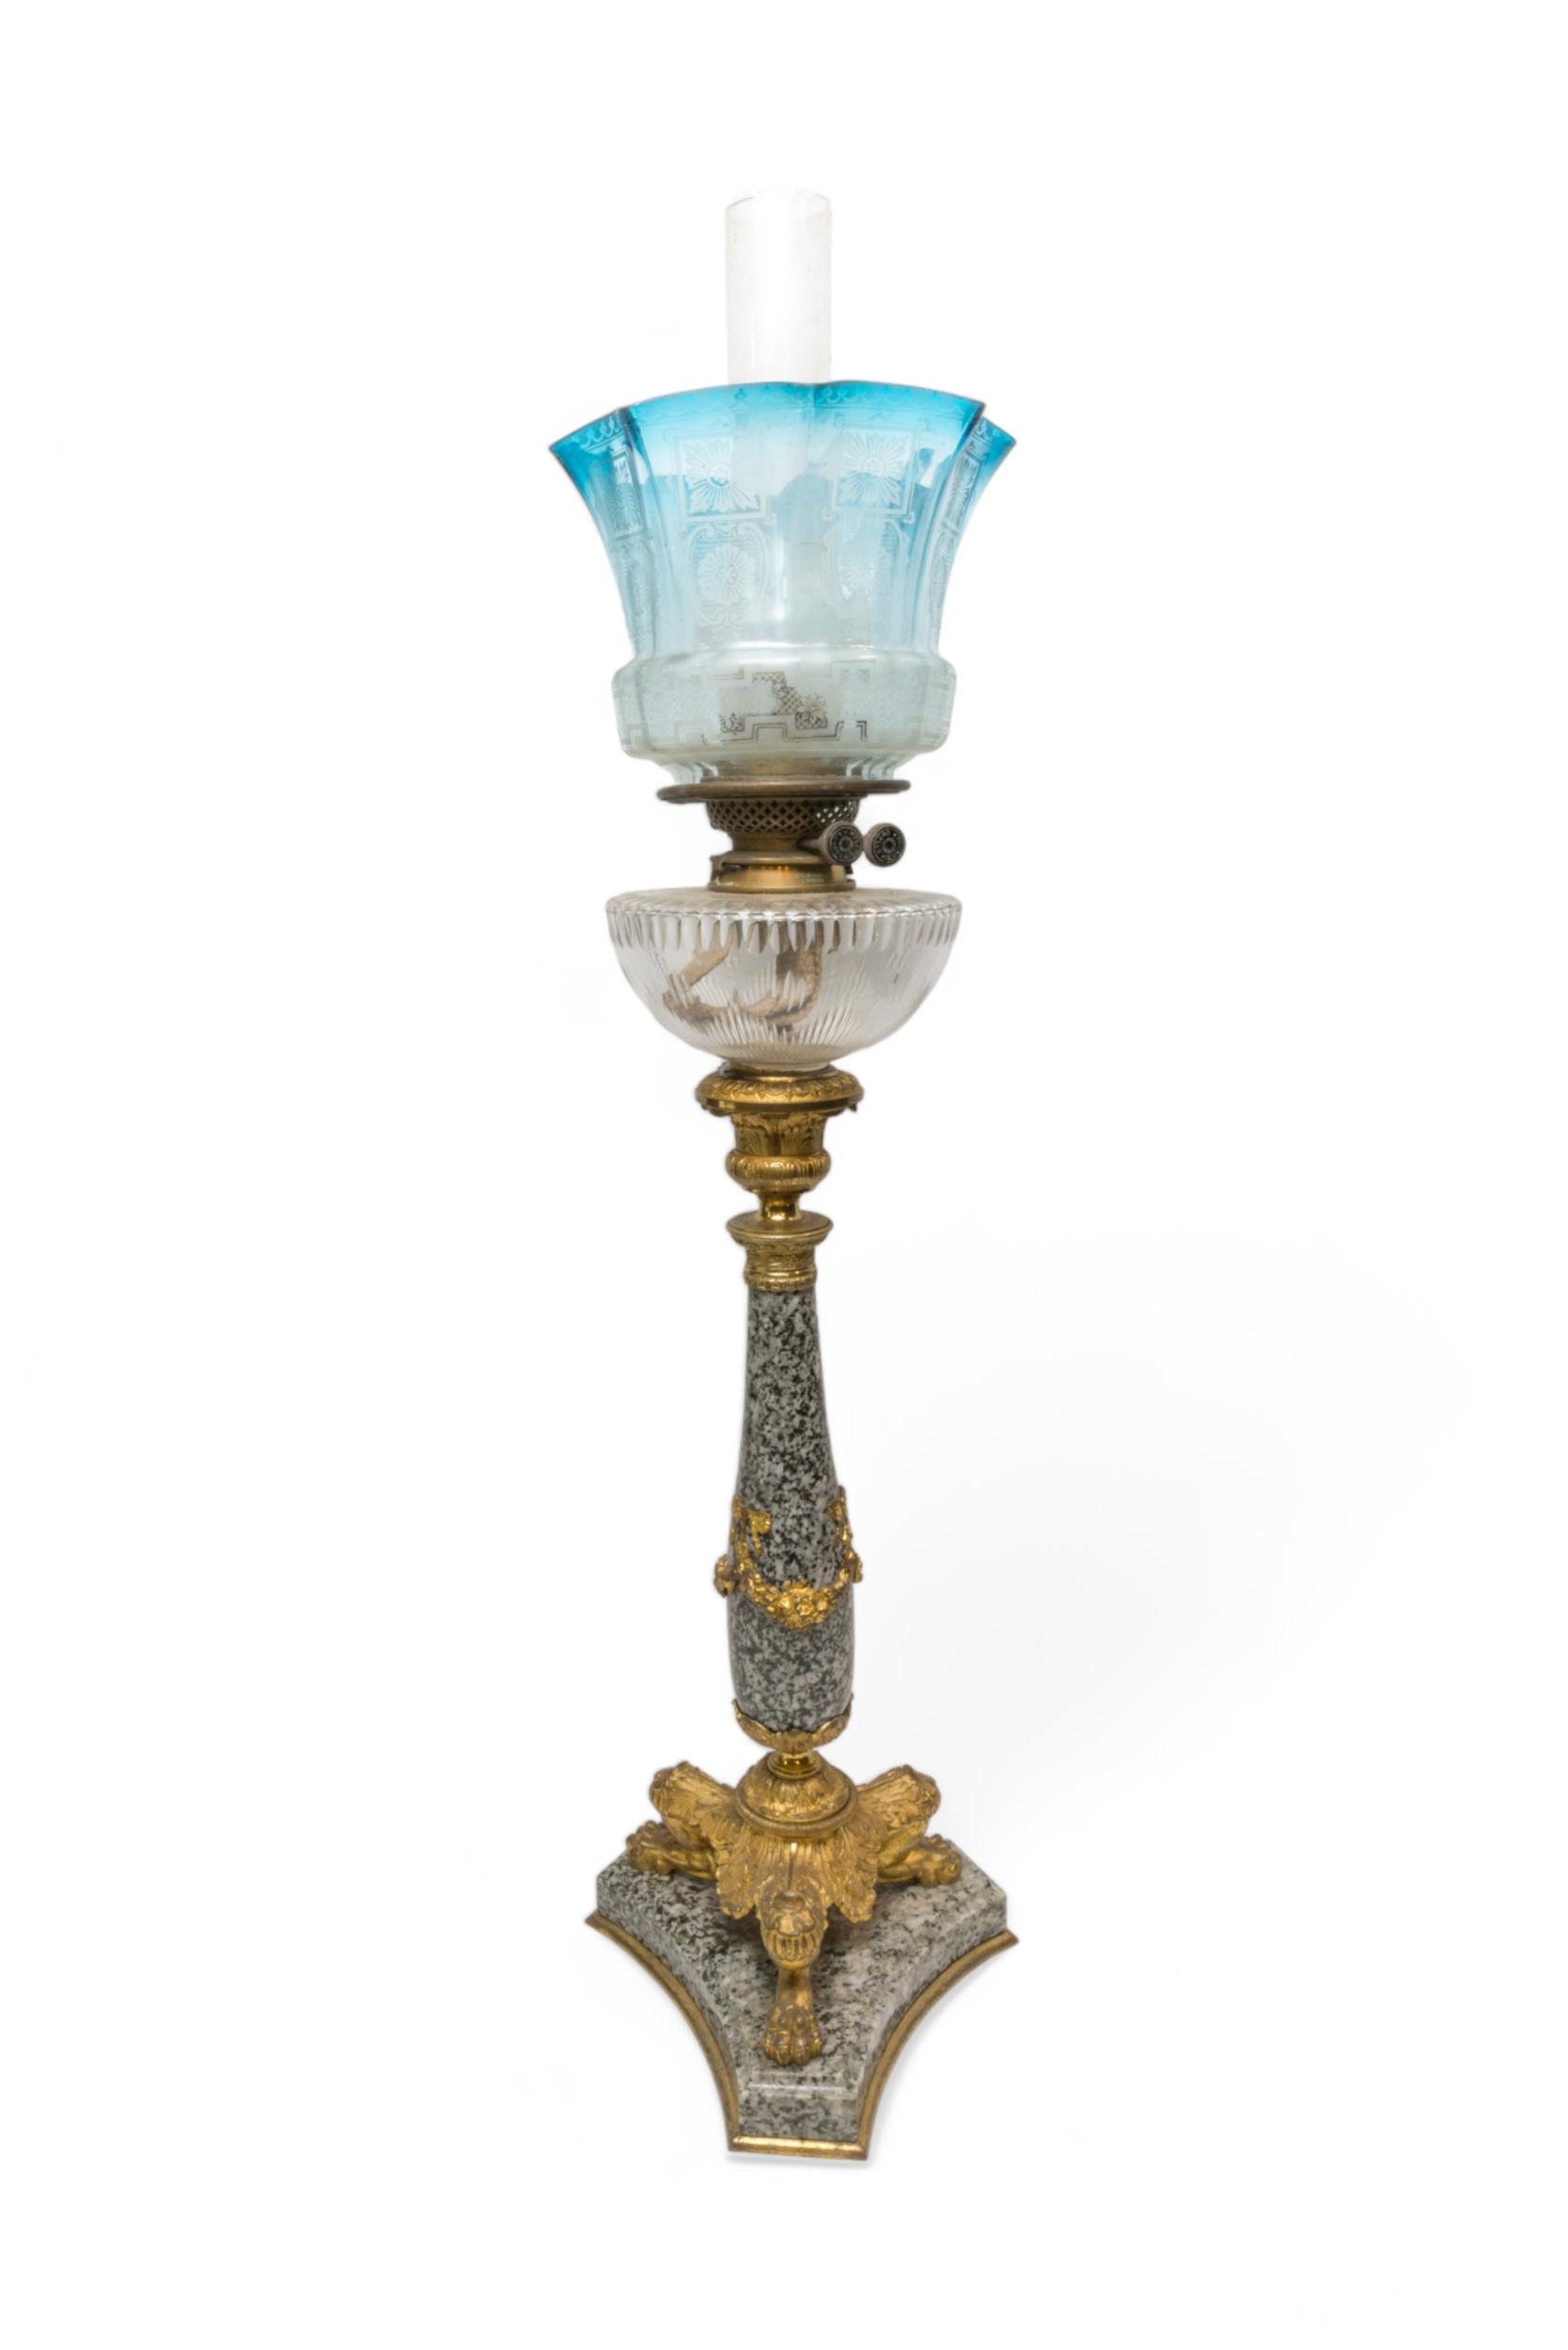 A GOOD 19TH CENTURY POLISHED STONE OIL LAMP with gilt tri-form platform base and mounts with cut